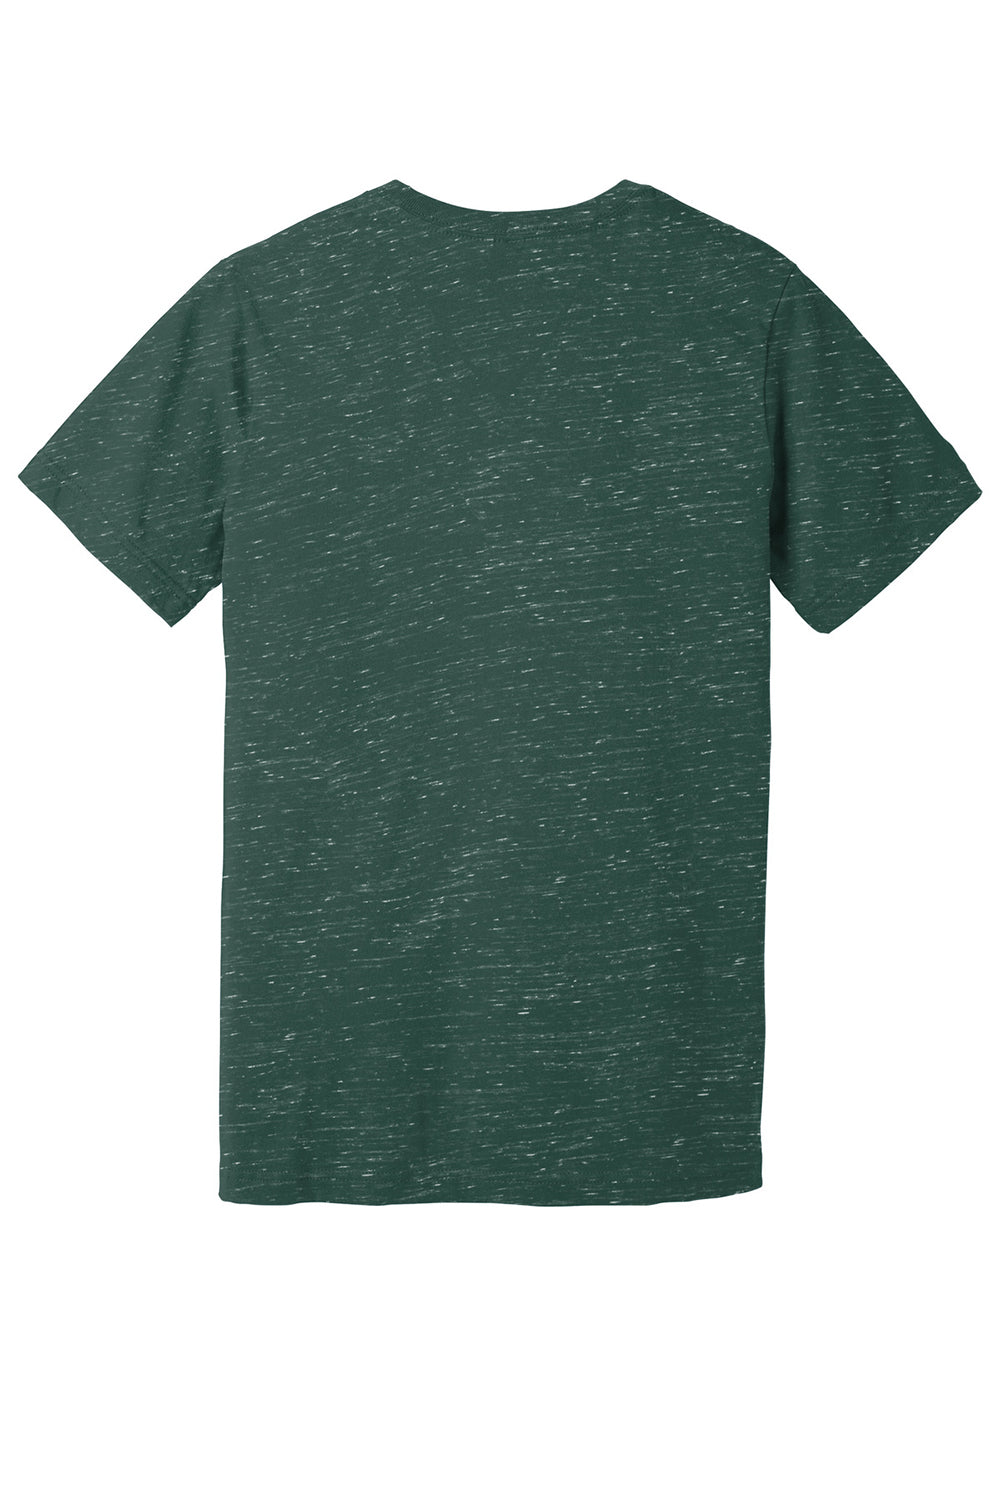 Bella + Canvas BC3655/3655C Mens Textured Jersey Short Sleeve V-Neck T-Shirt Forest Green Marble Flat Back